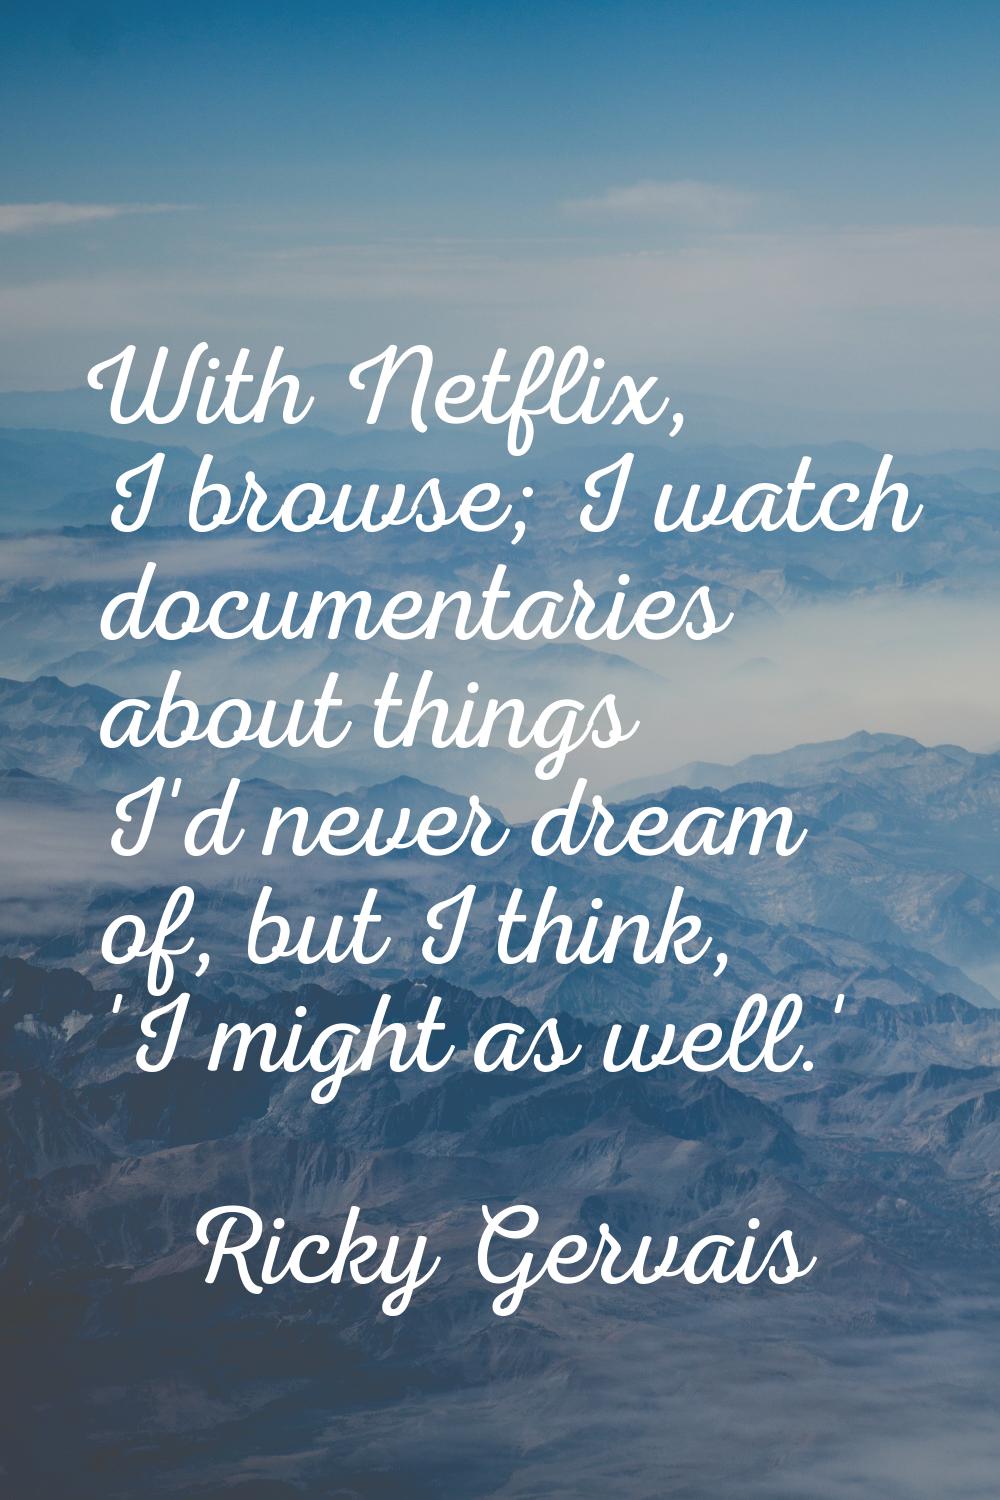 With Netflix, I browse; I watch documentaries about things I'd never dream of, but I think, 'I migh